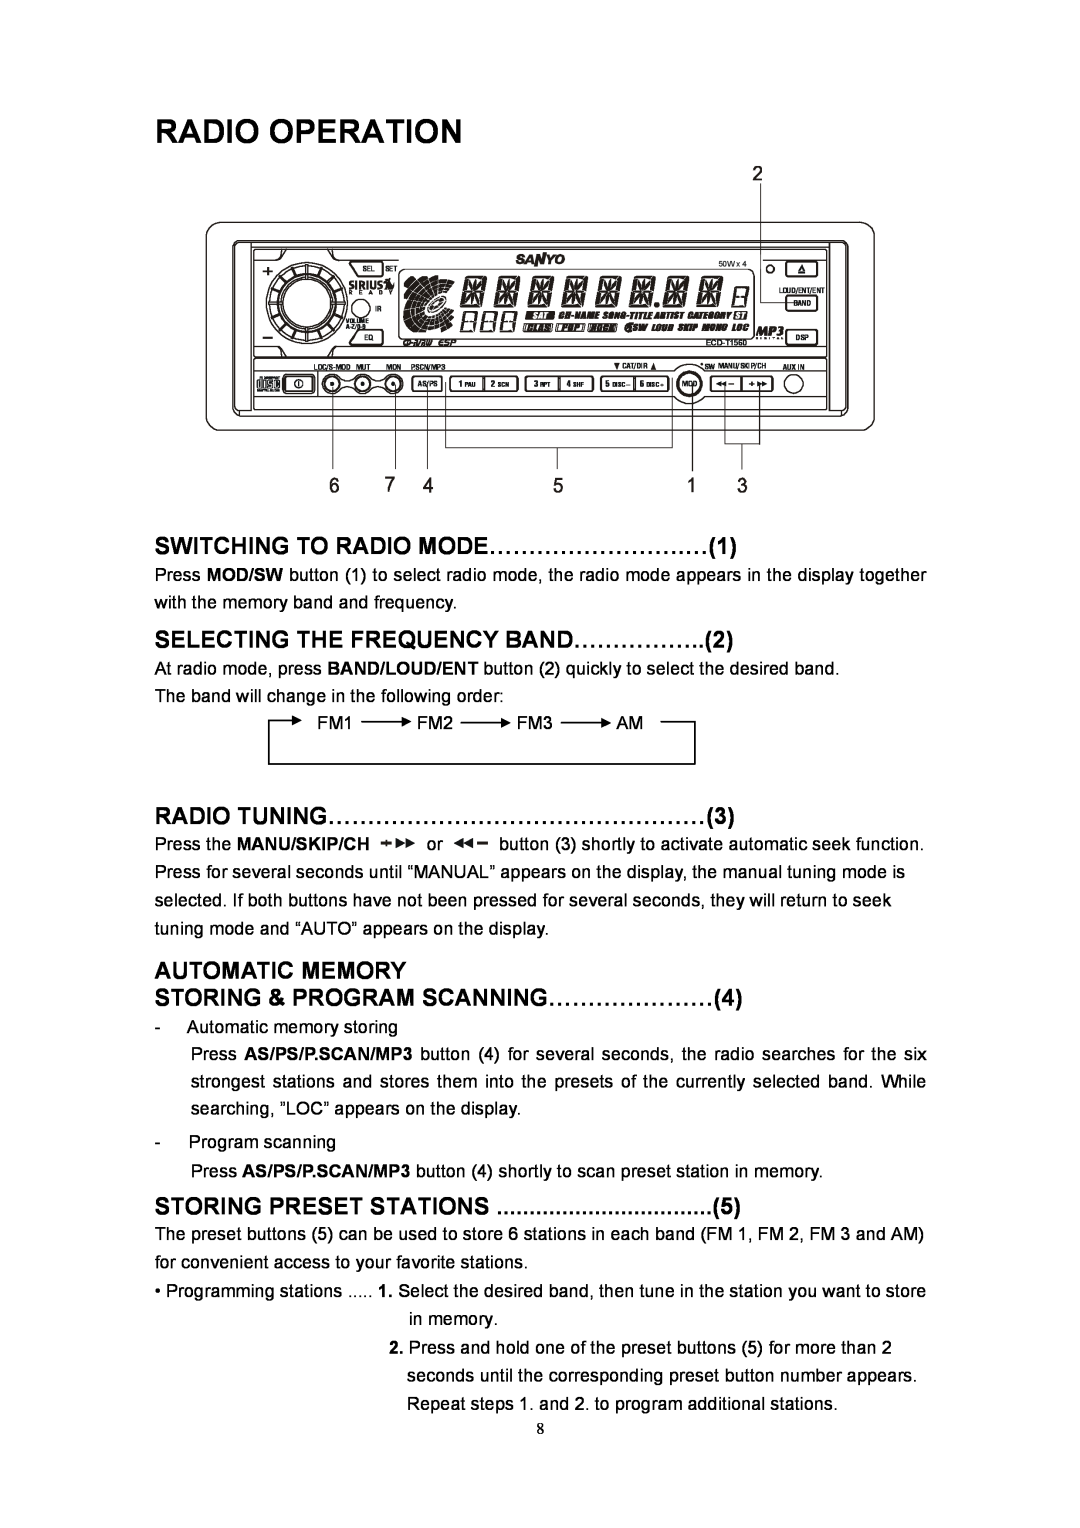 Sanyo ECD-T1560 manual Radio Operation, SWITCHING TO RADIO MODE…………………….…1, SELECTING THE FREQUENCY BAND……………..2 